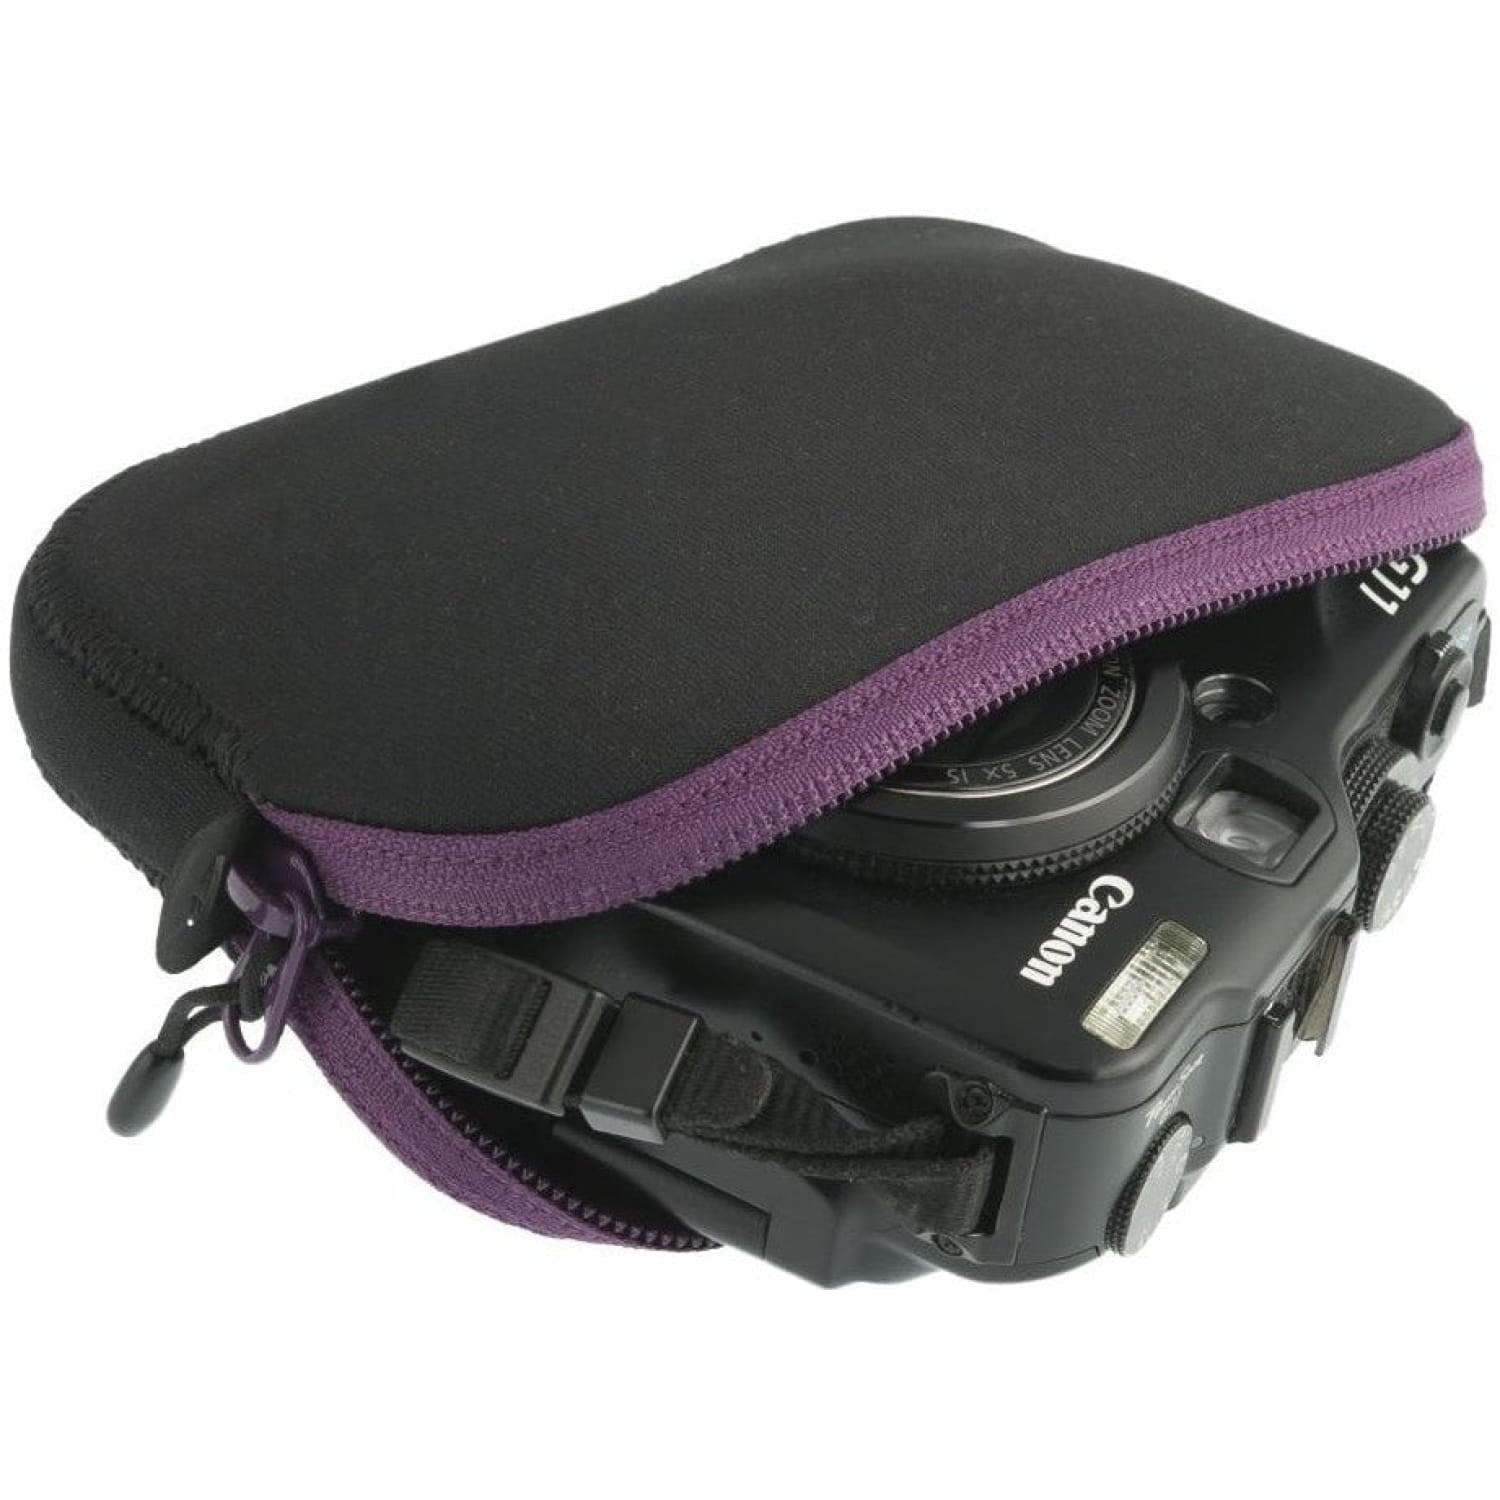 Padded Gear Pouch